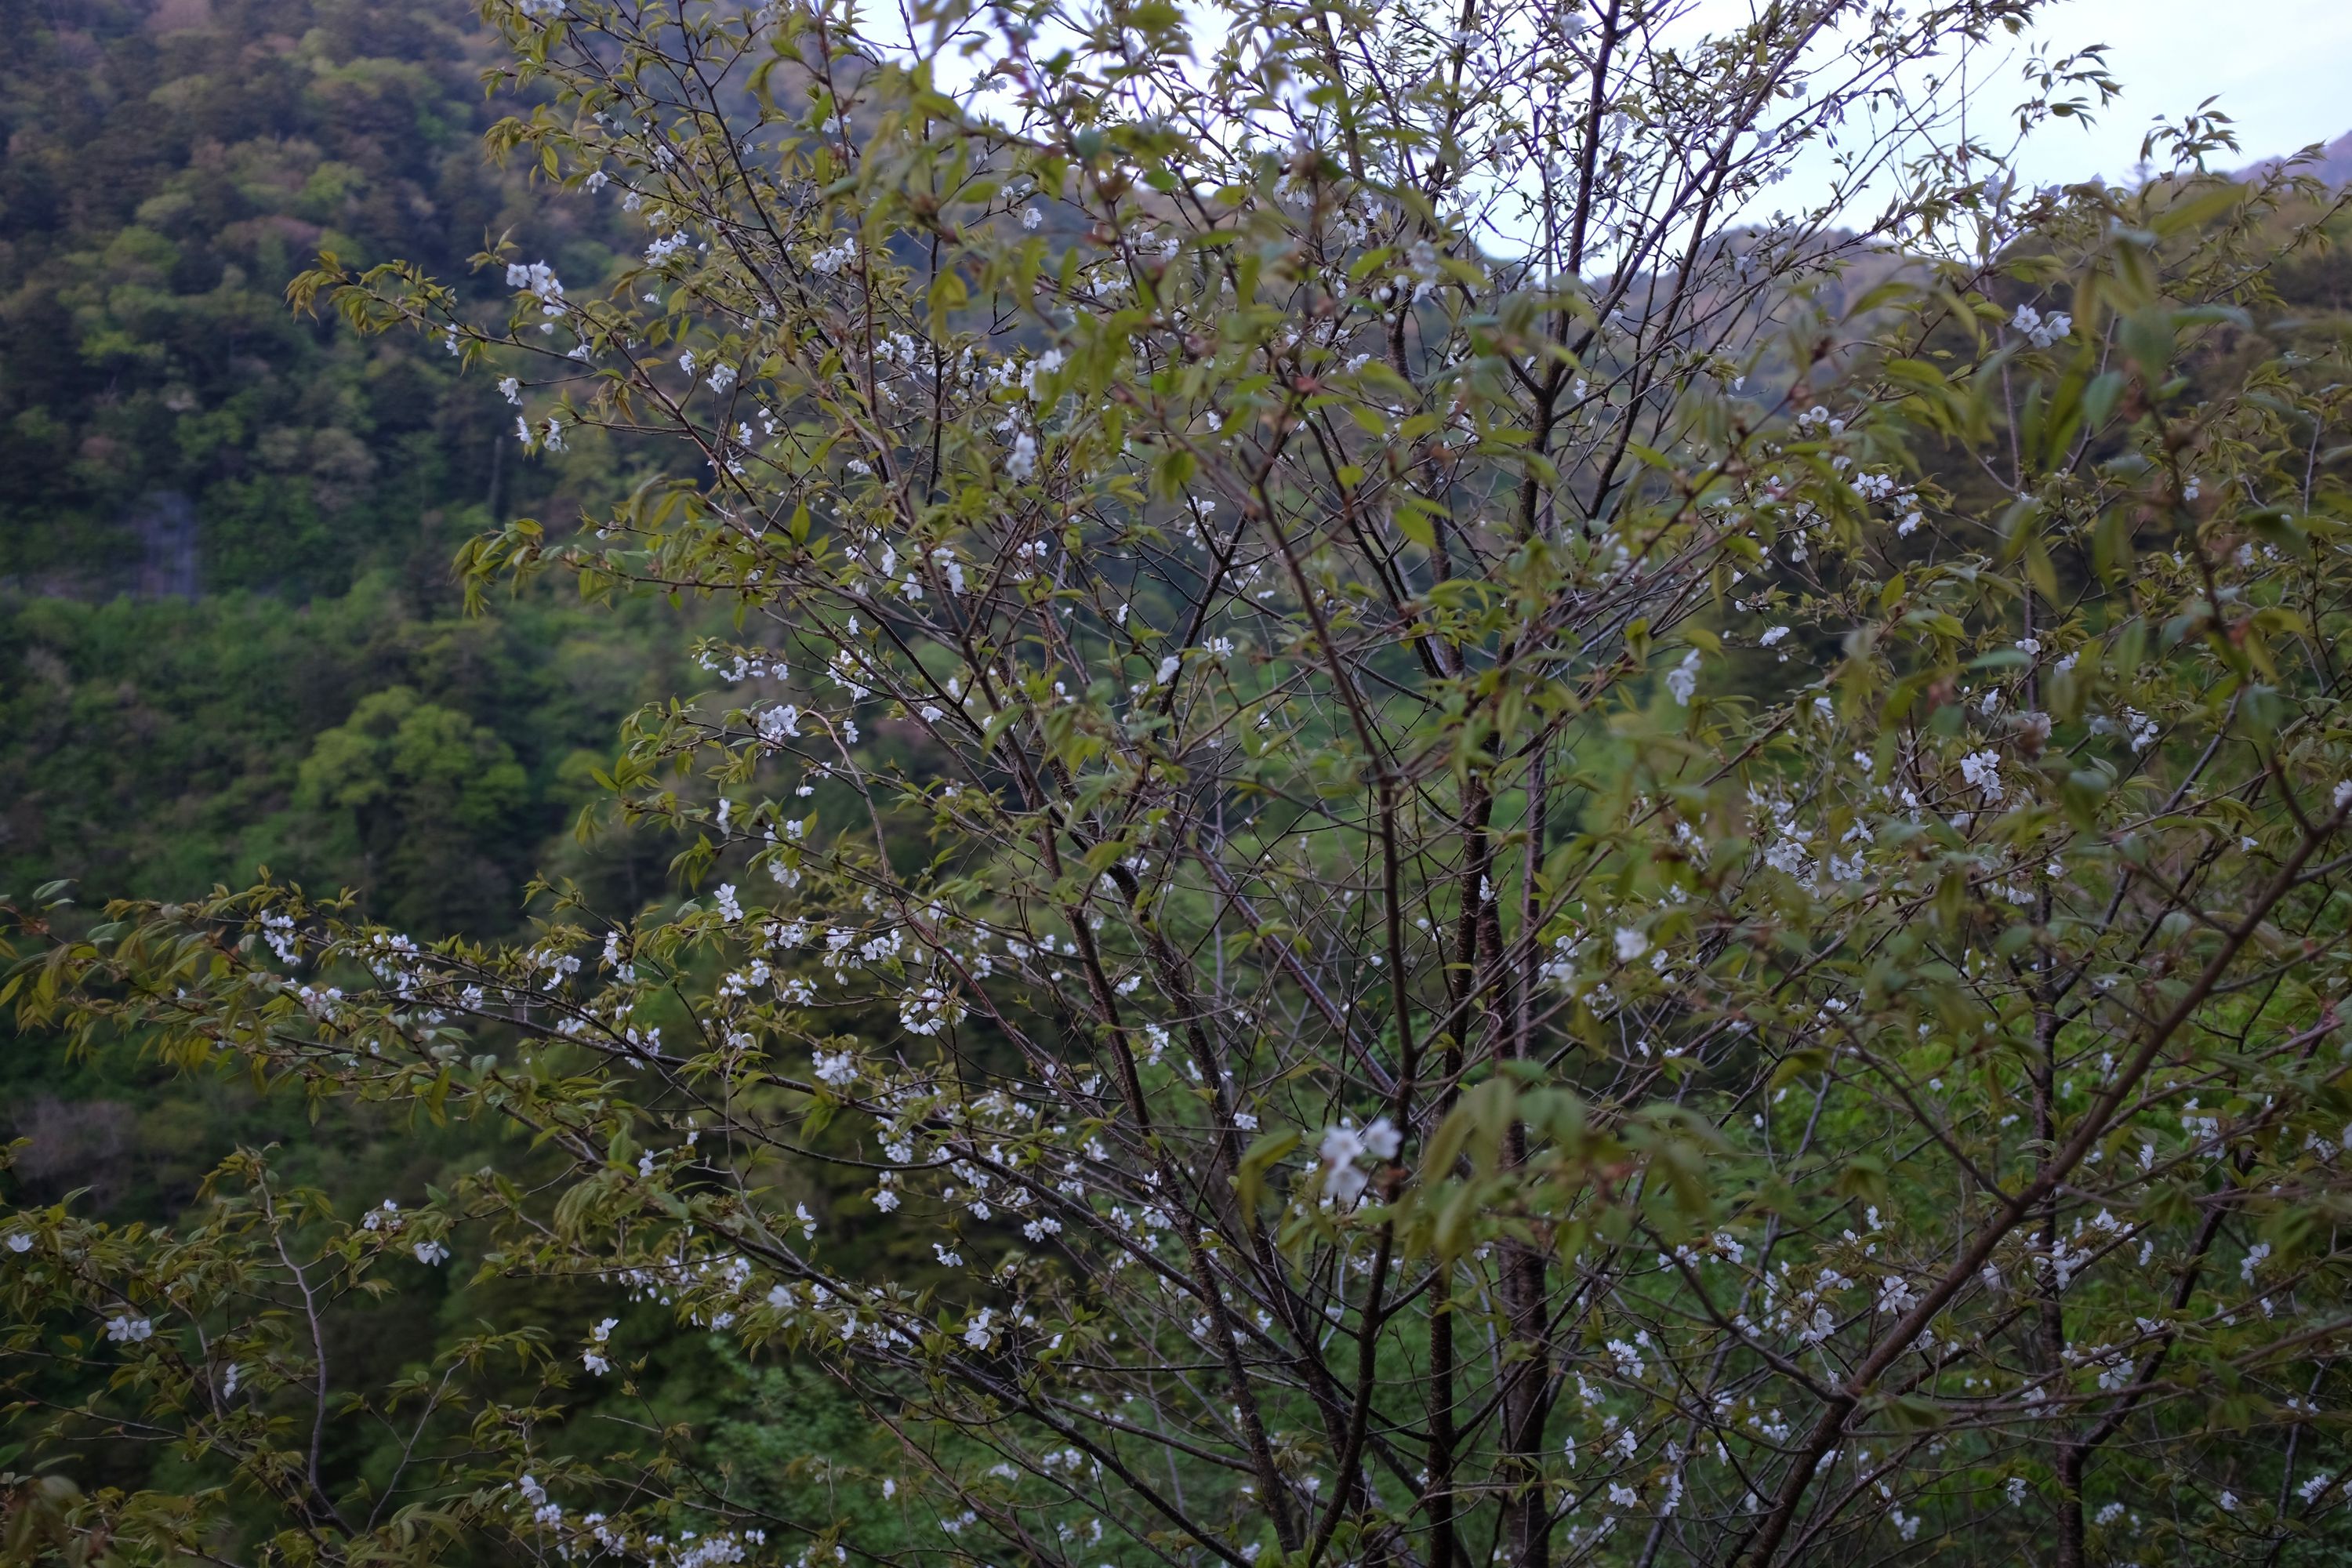 A mountain cherry tree in bloom in the forest.